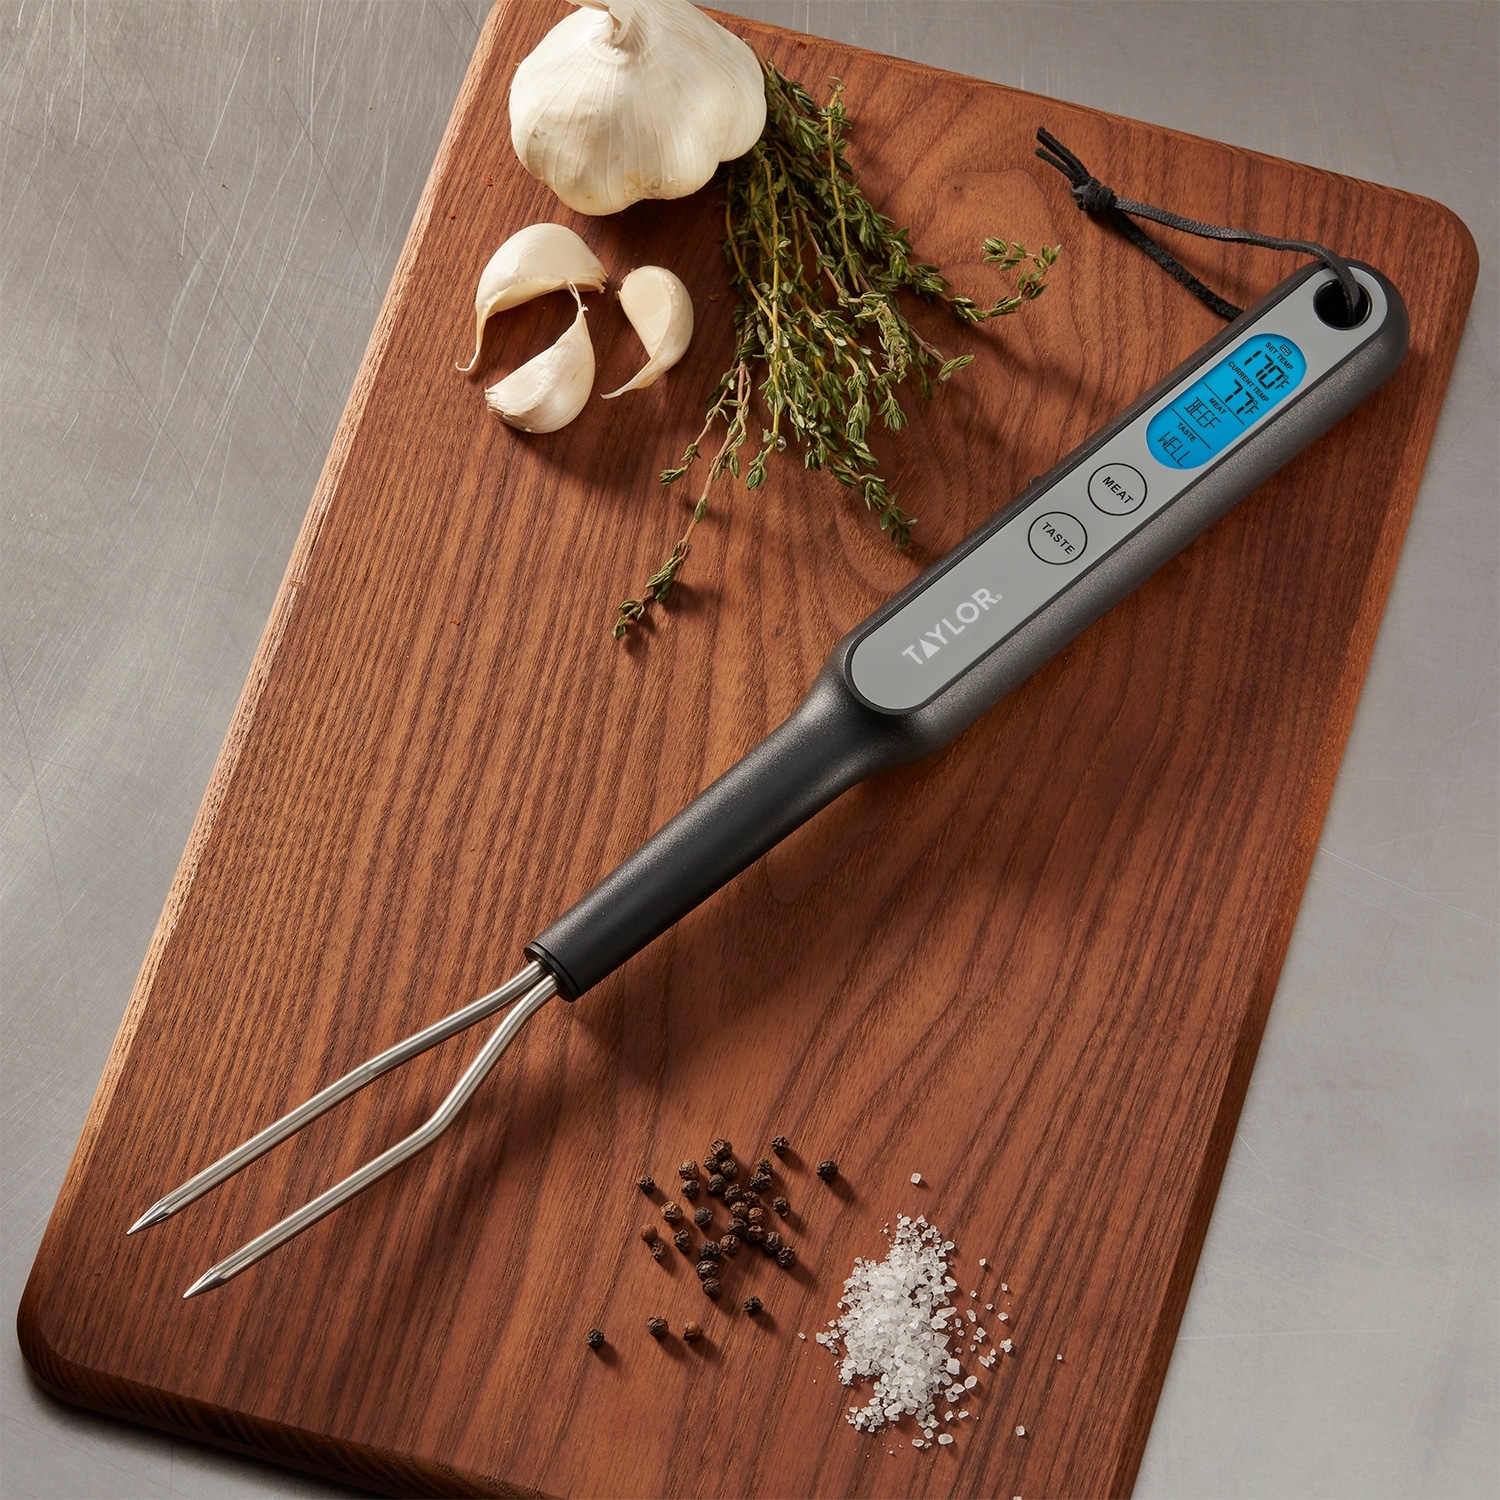 https://ak1.ostkcdn.com/images/products/is/images/direct/8b01f0455061c3c797caf1308bf6b134ea40d1fa/Taylor-Precision-Products-Digital-Fork-Thermometer-with-Preset-Cooking-Temperatures.jpg